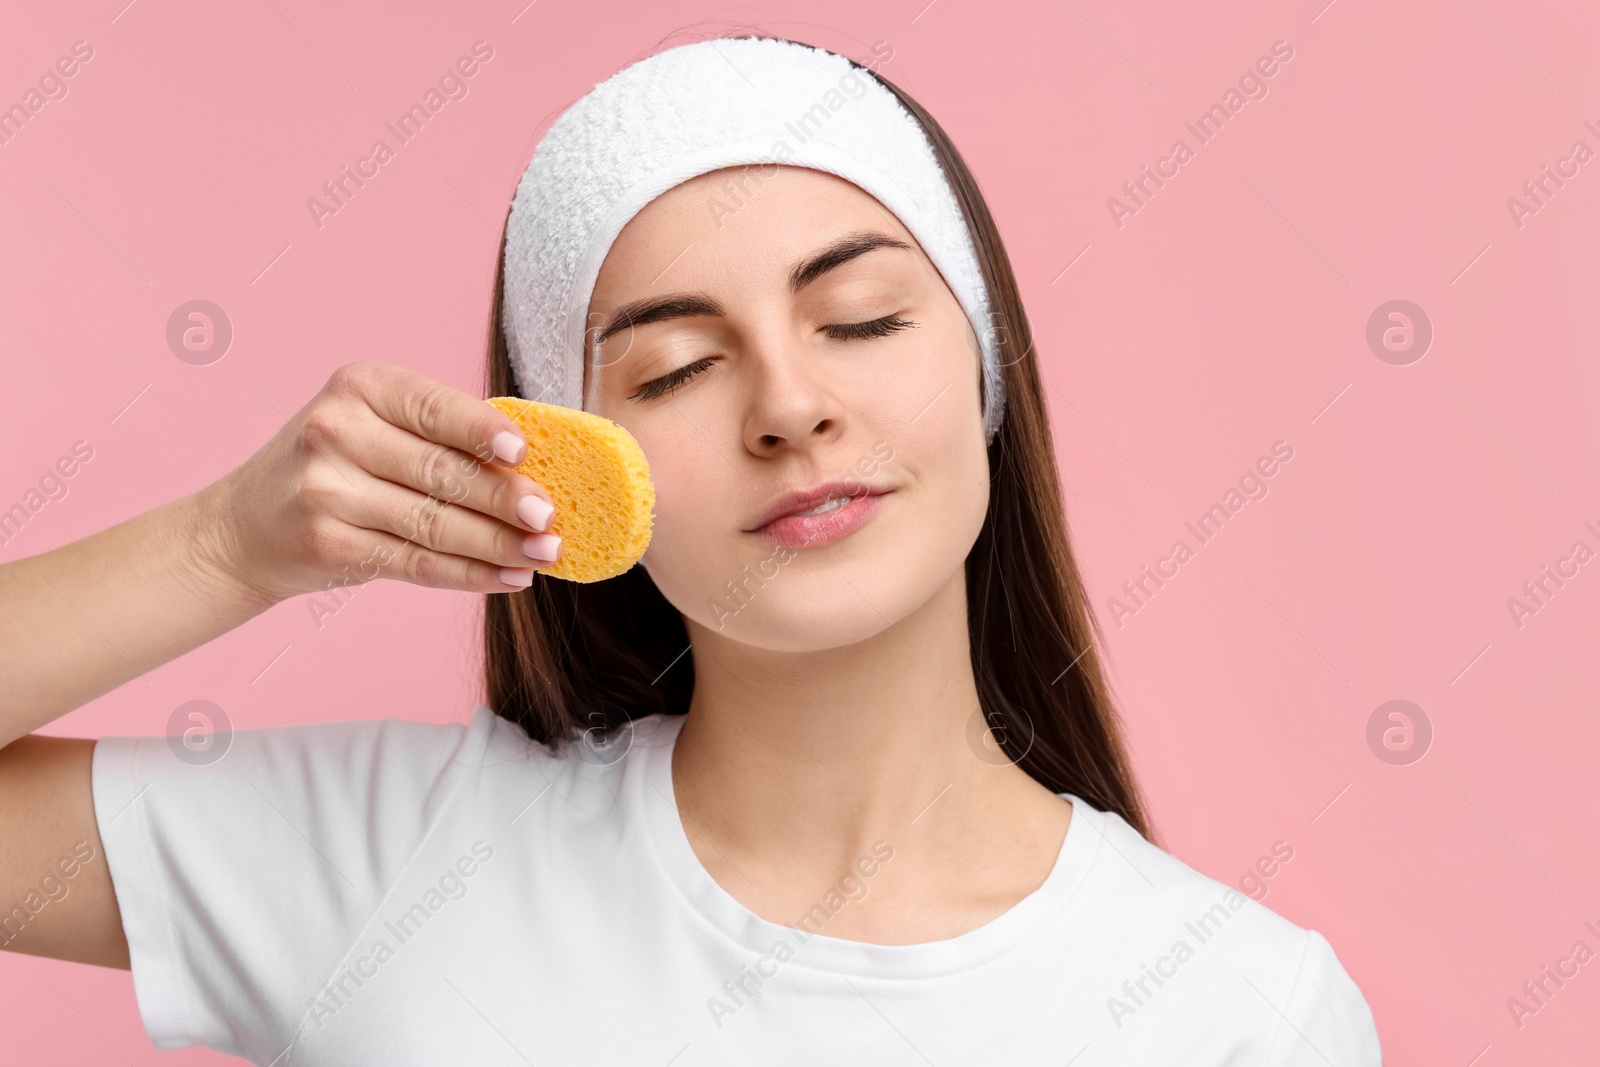 Photo of Young woman with headband washing her face using sponge on pink background